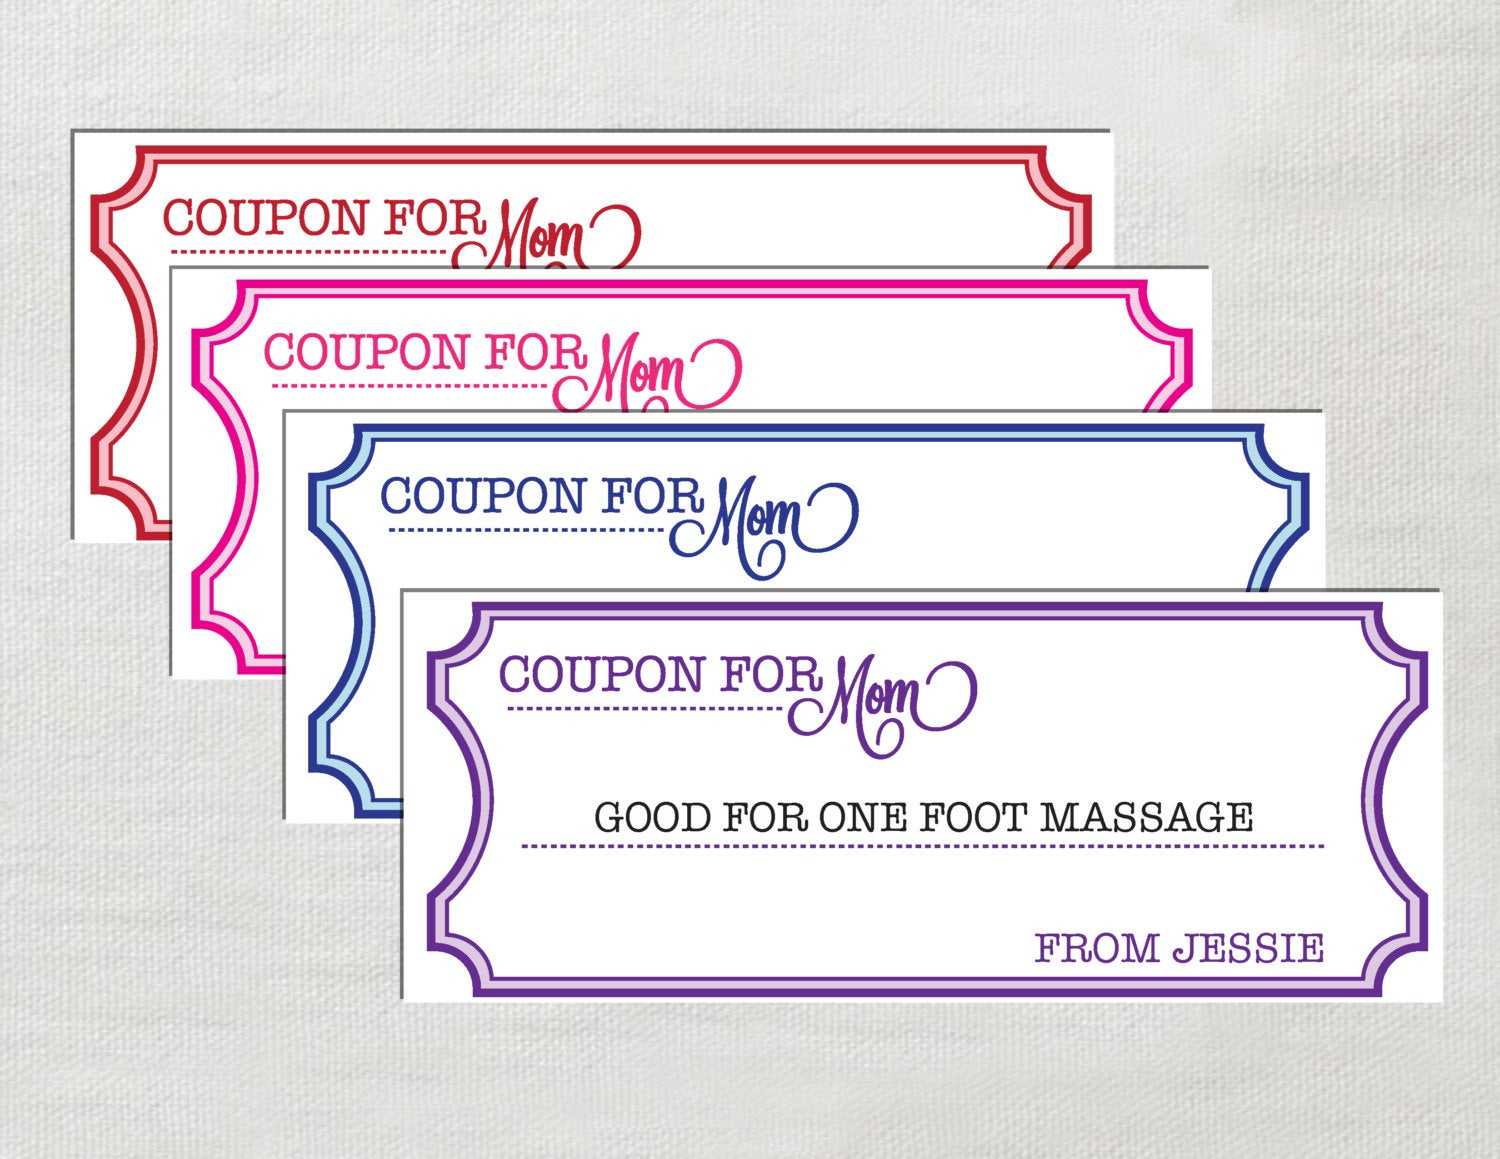 Coupon Template Free Word ] – Doc 585450 Coupon Template For Regarding Love Coupon Template For Word